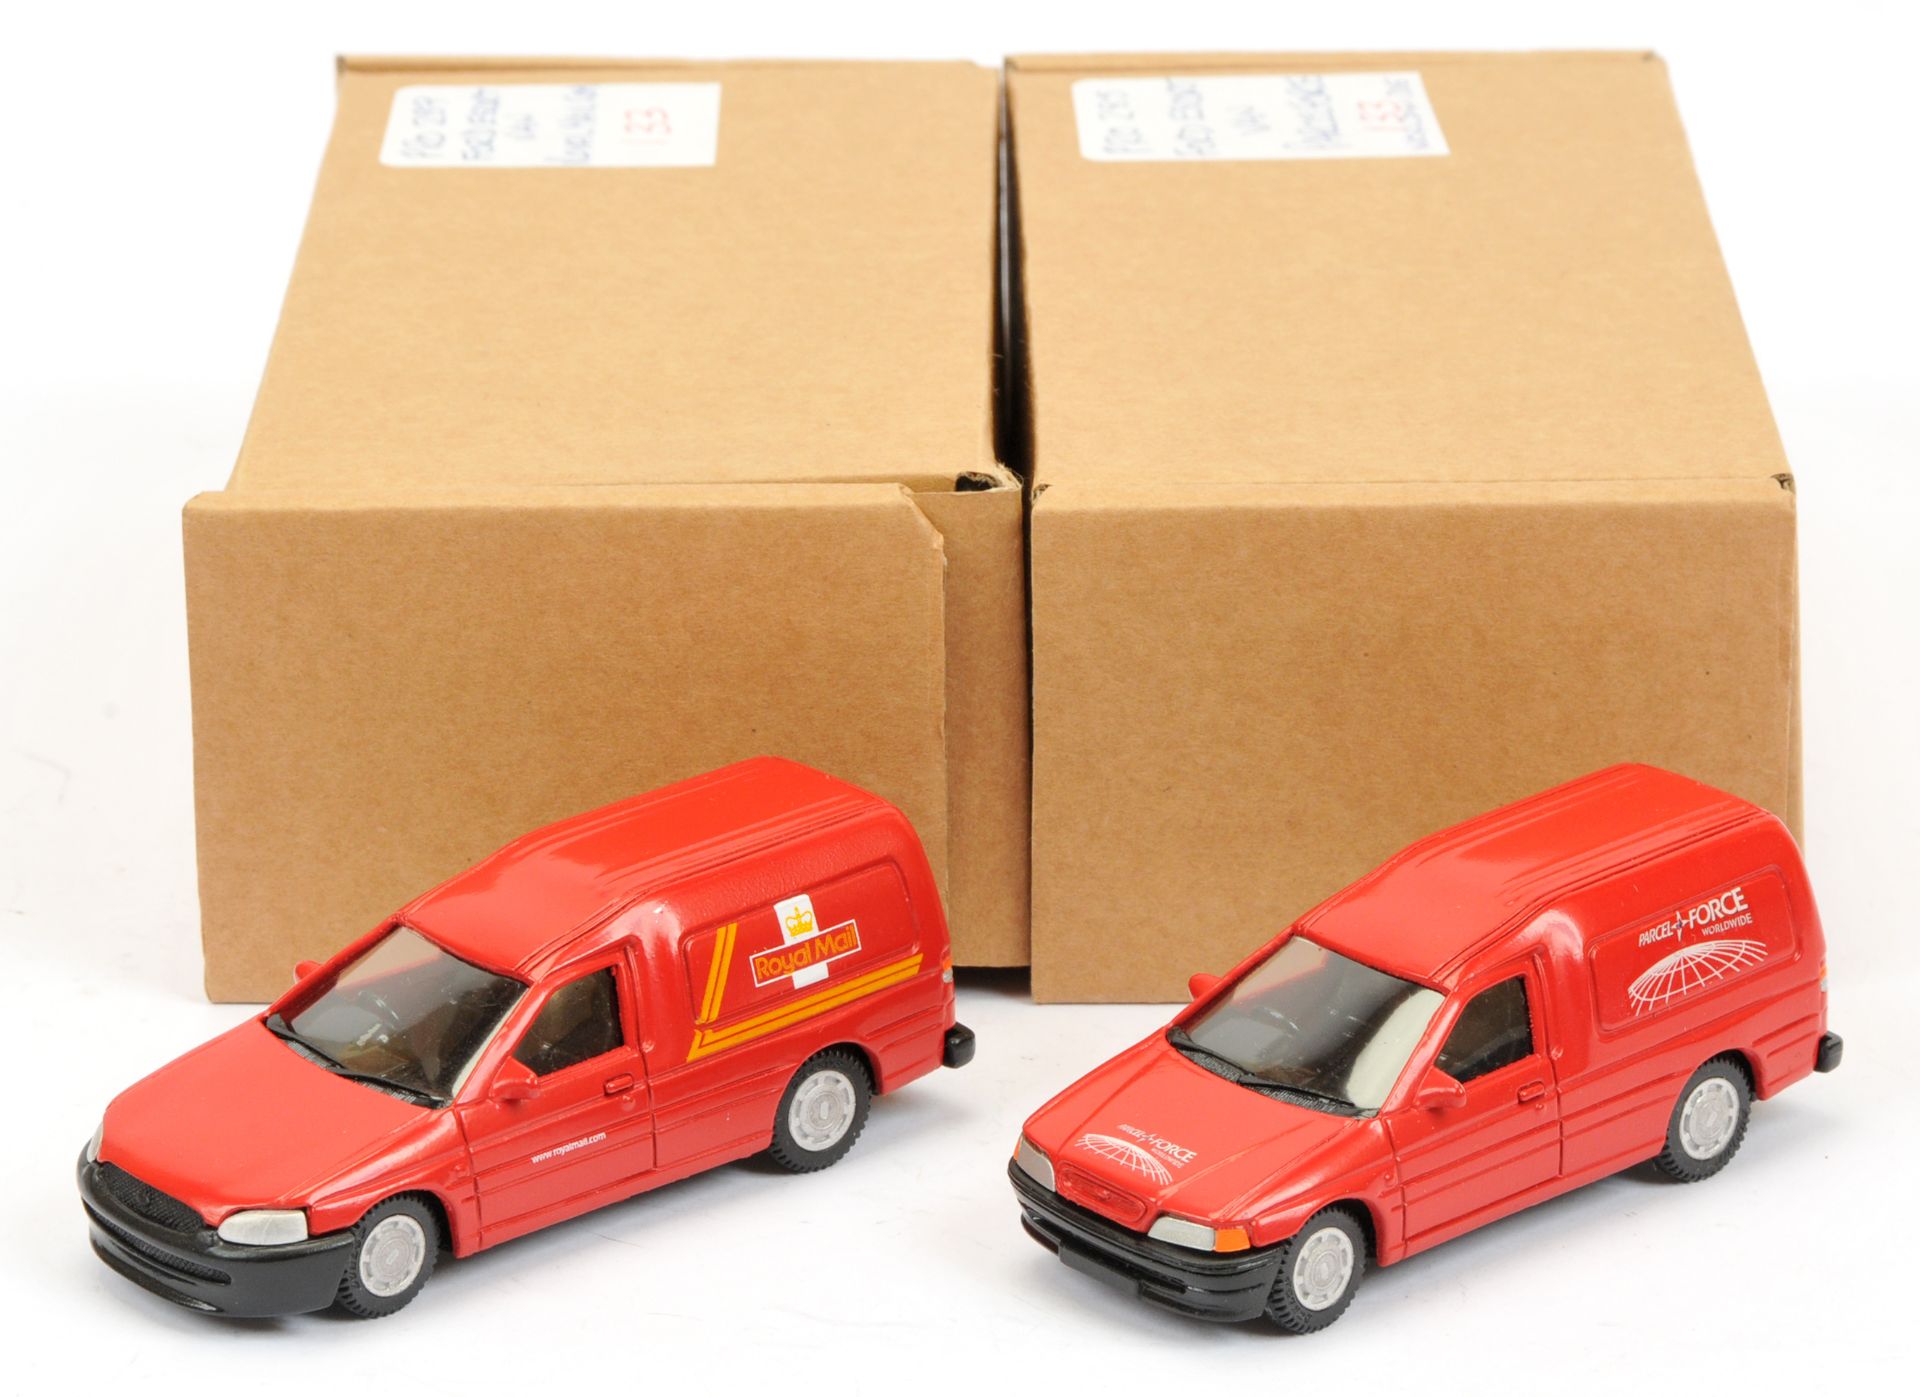 Promod Resin/White Metal Ford Escort  Van A Pair (1) "Royal mail" - Red and (2) "Parcel Force" - Re